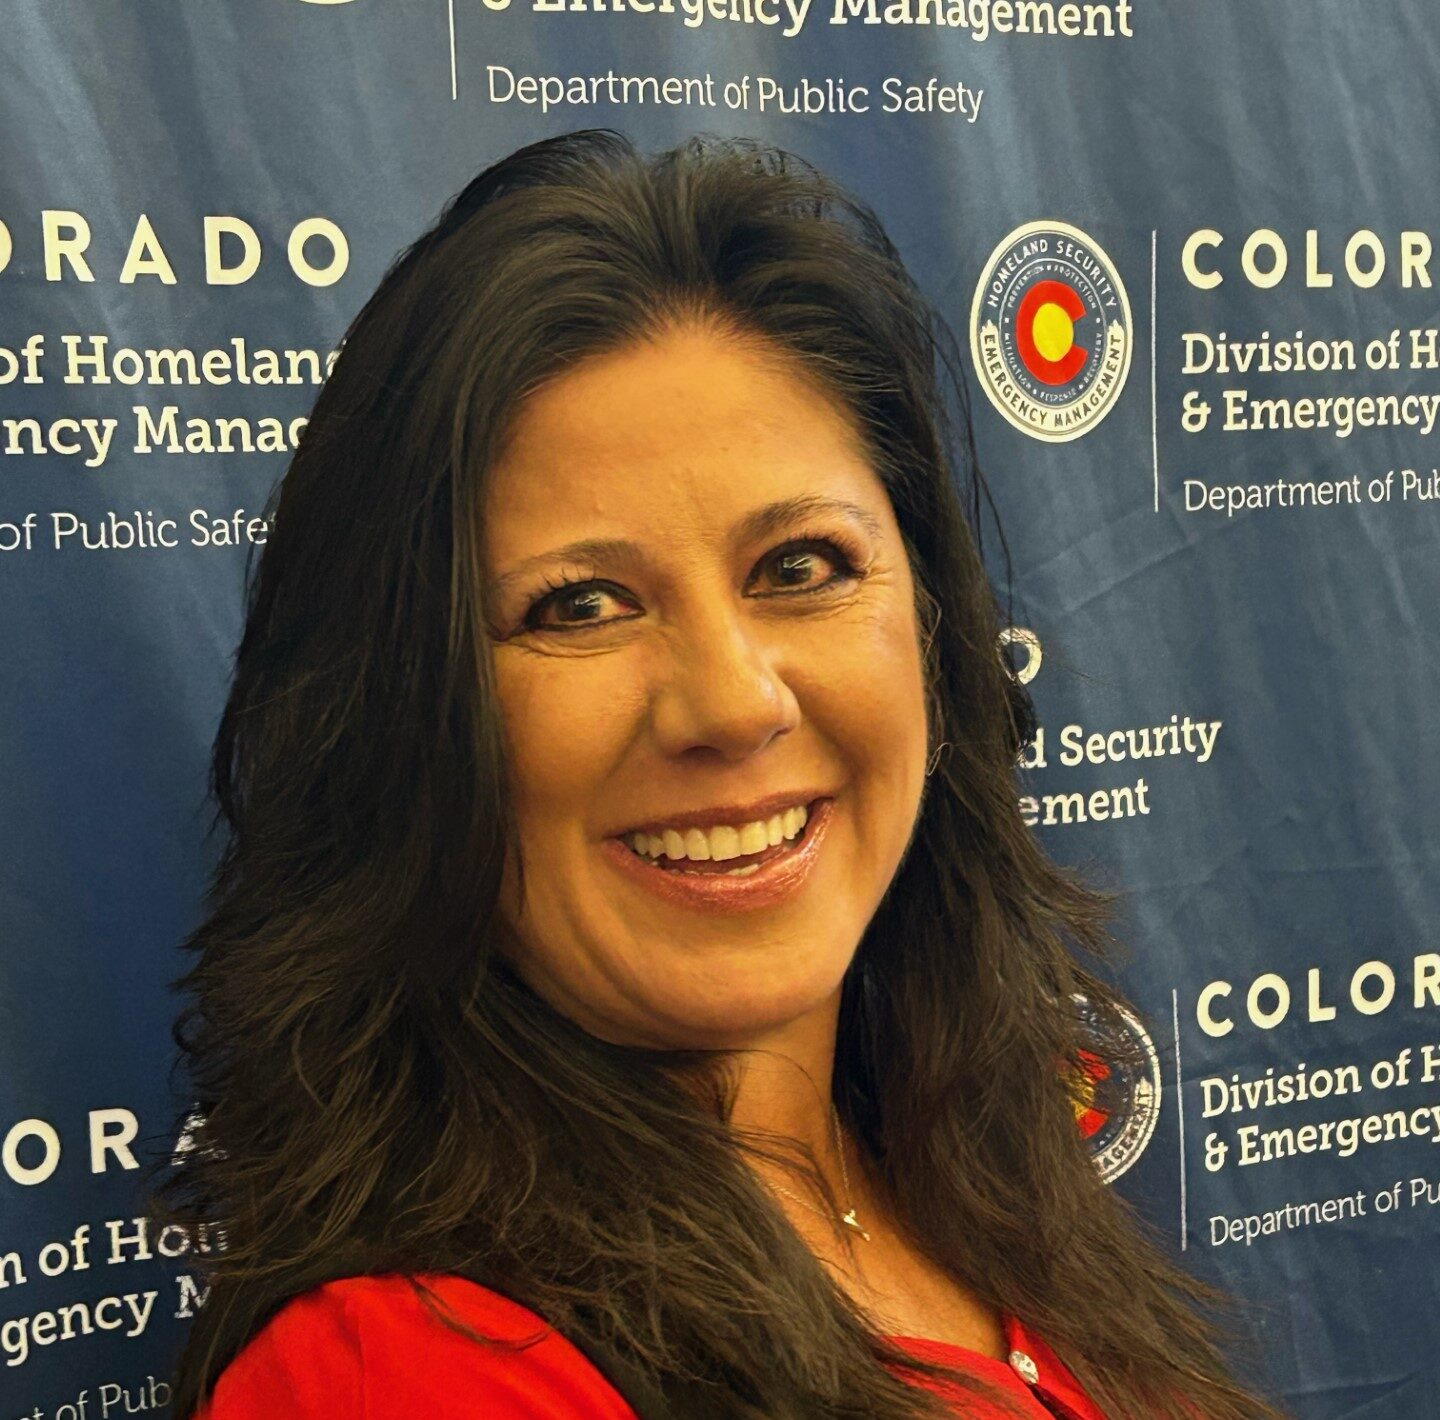 Sadie Martinez posed against a navy blue Colorado Division of Homeland Security and Emergency Management backdrop